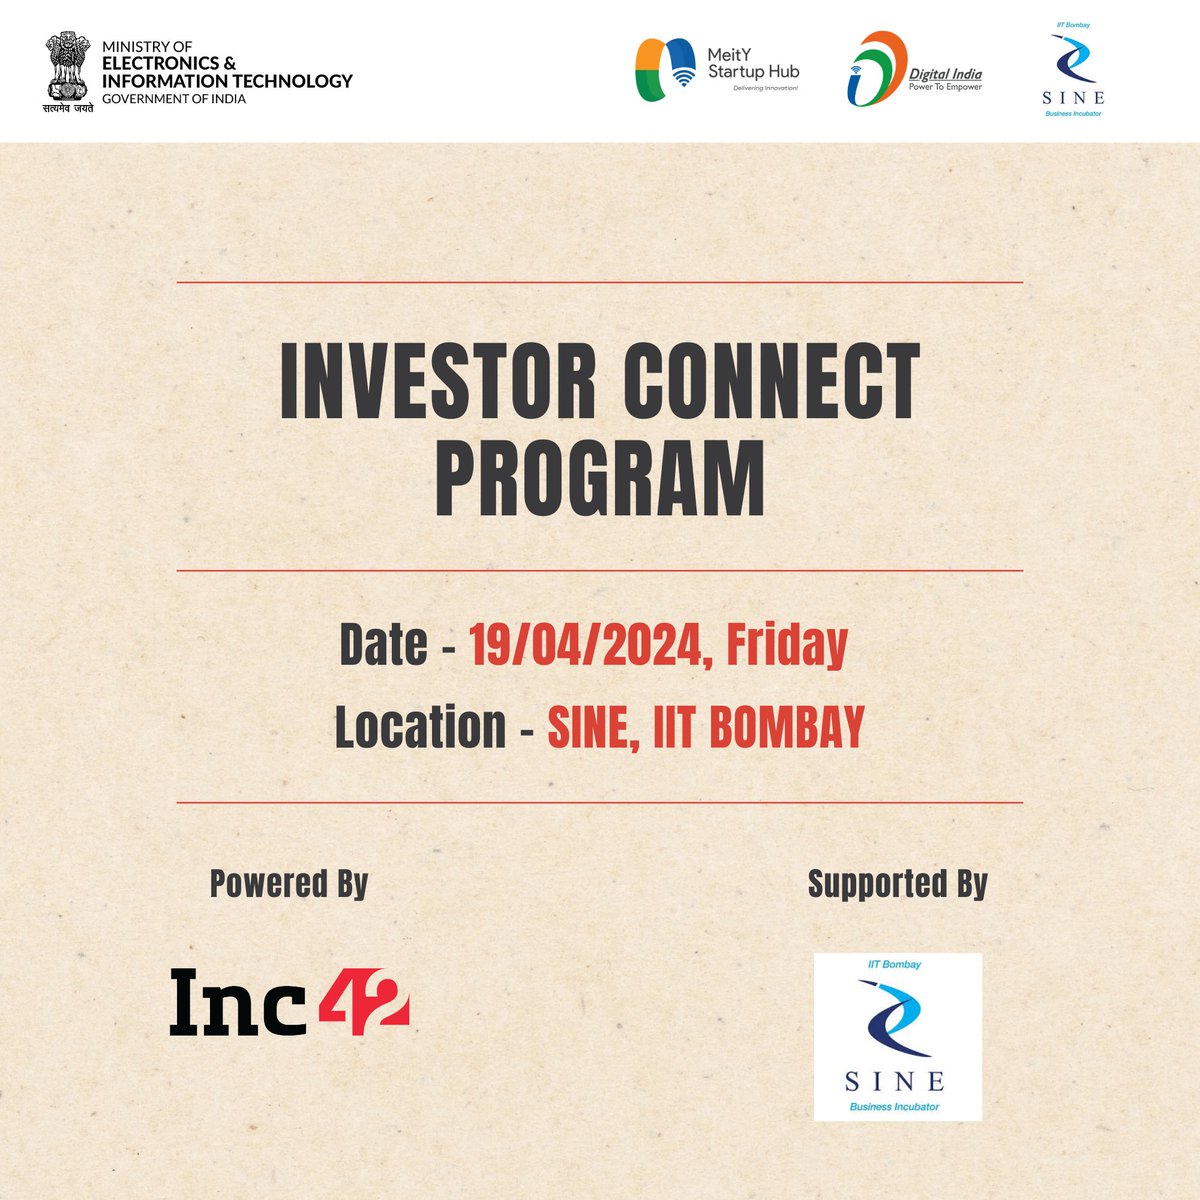 To empower emerging startups in Mumbai with essential guidance and mentorship, MeitY Startup Hub is organizing its 5th ‘Investor Connect Program’ supported by Society for Innovation & Entrepreneurship -SINE IIT Bombay, Indian Institute of Technology, Bombay on 19th April ,2024 .